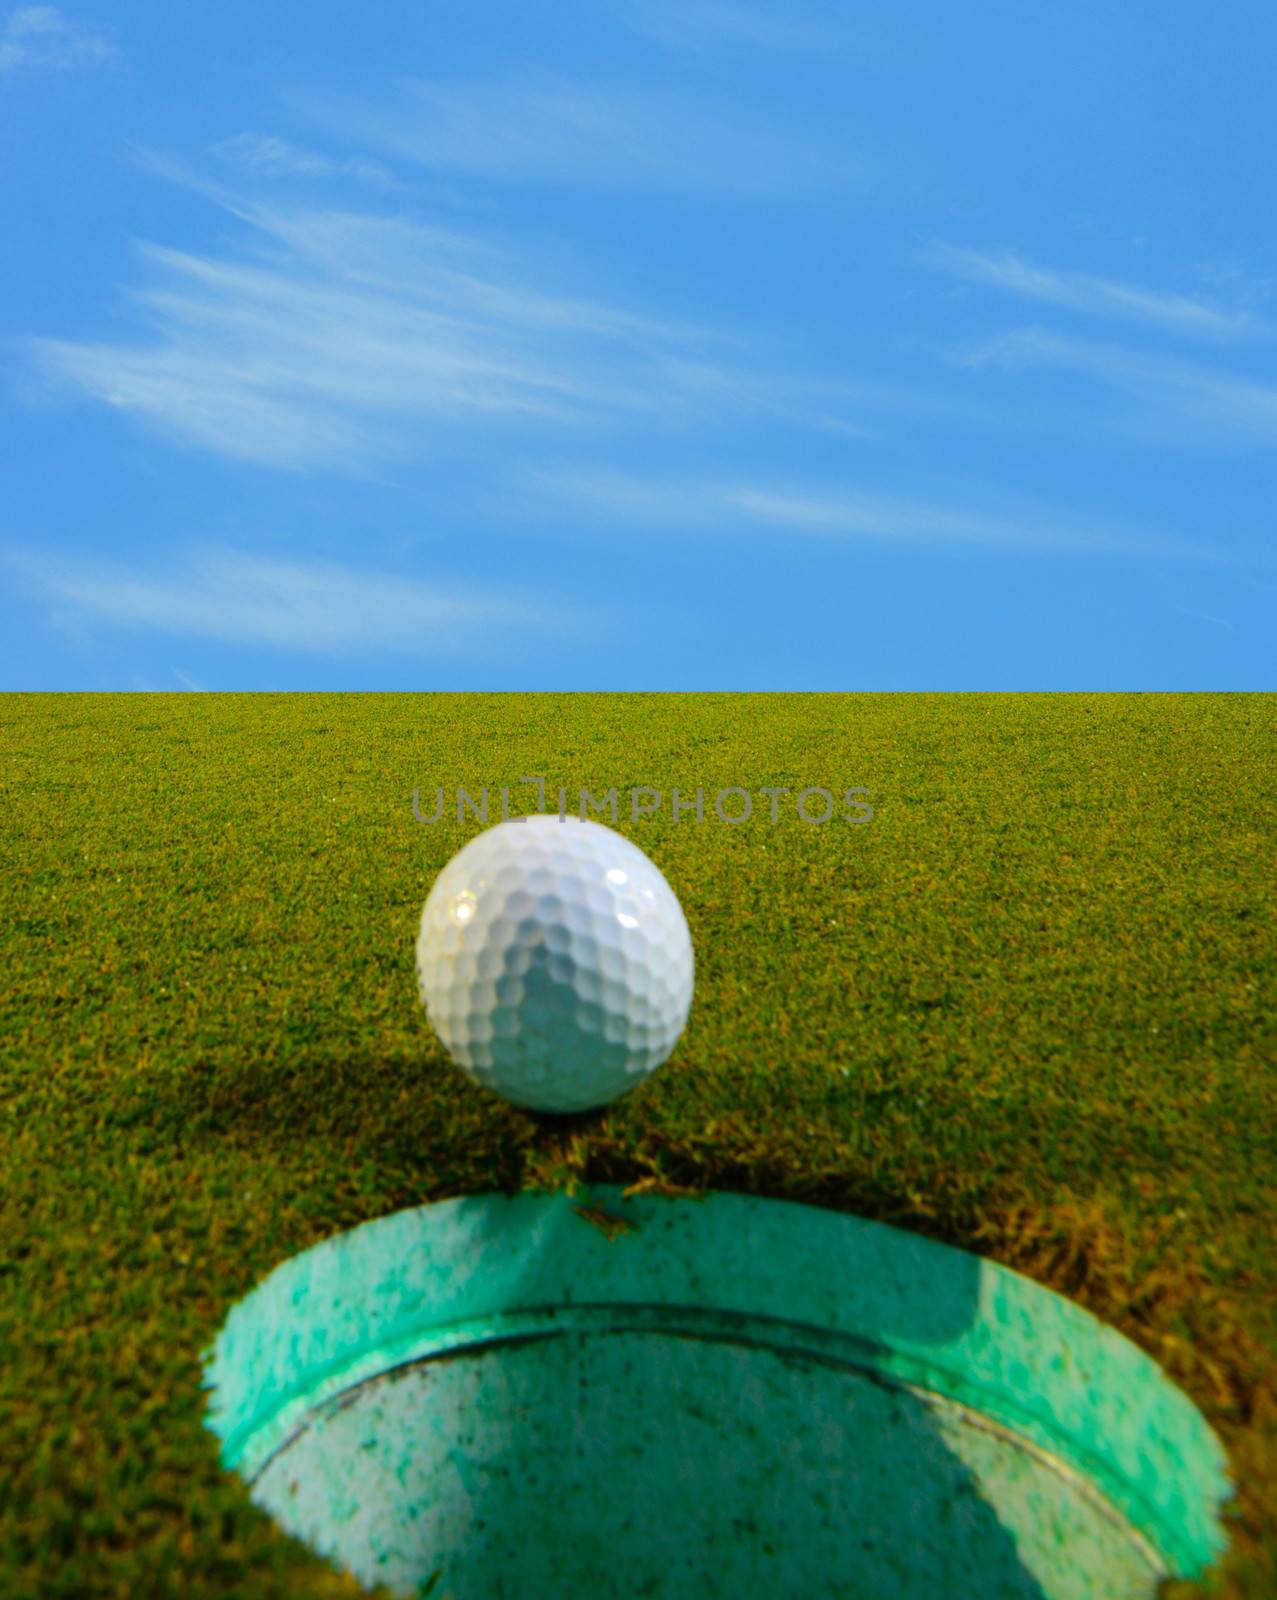 golf ball on golf course by ftlaudgirl